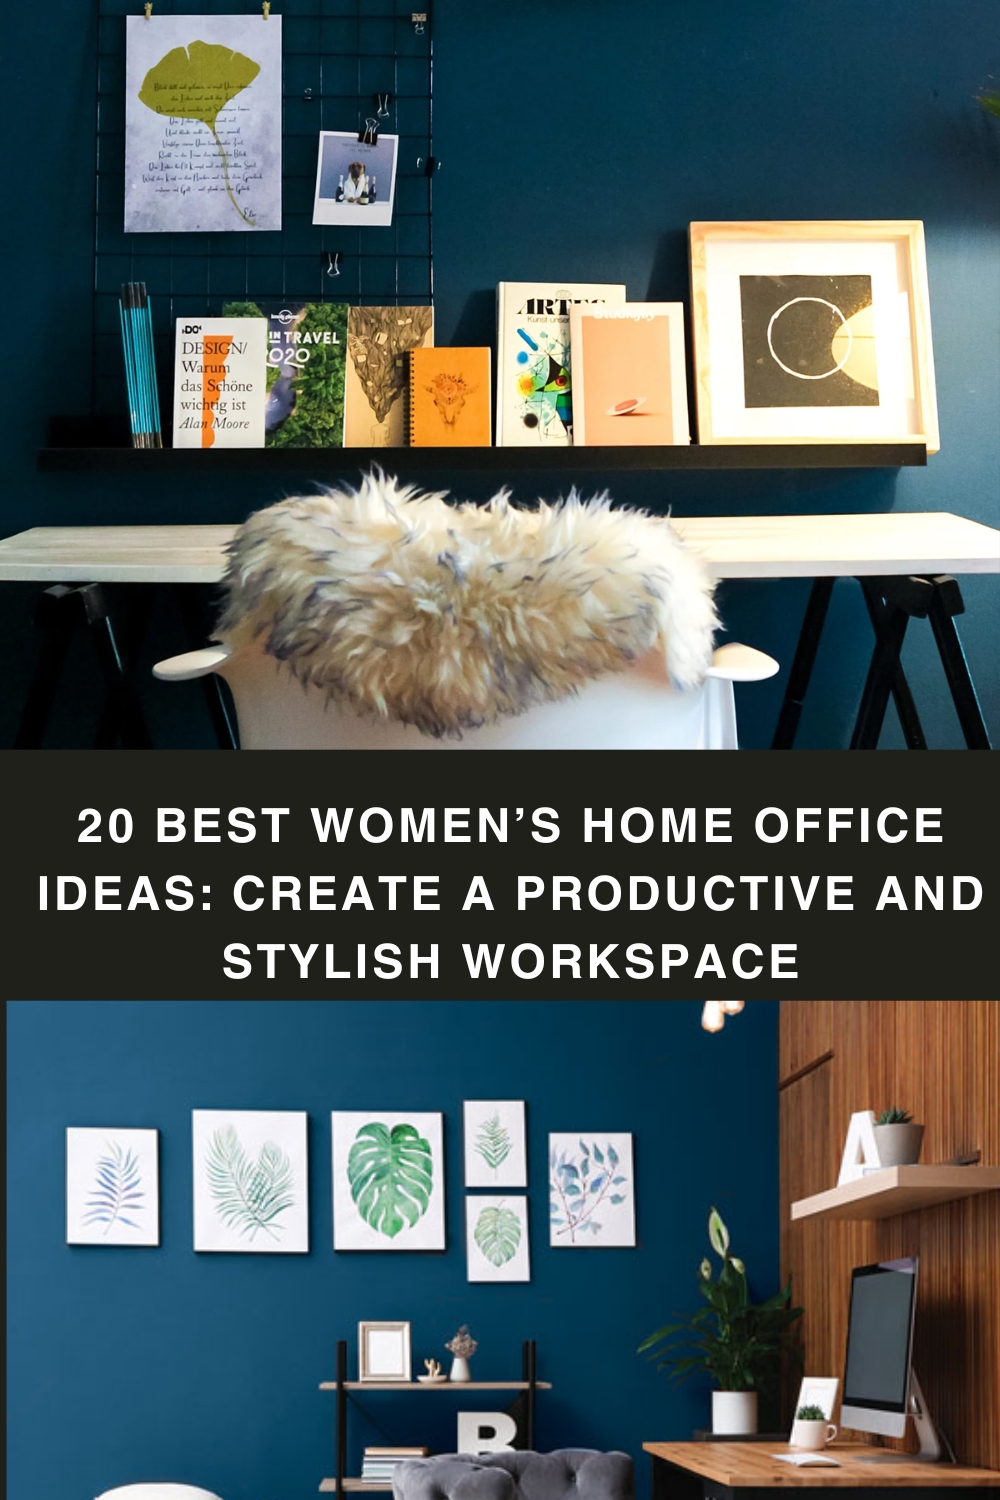 20 Best Women’s Home Office Ideas: Create a Productive and Stylish Workspace pin